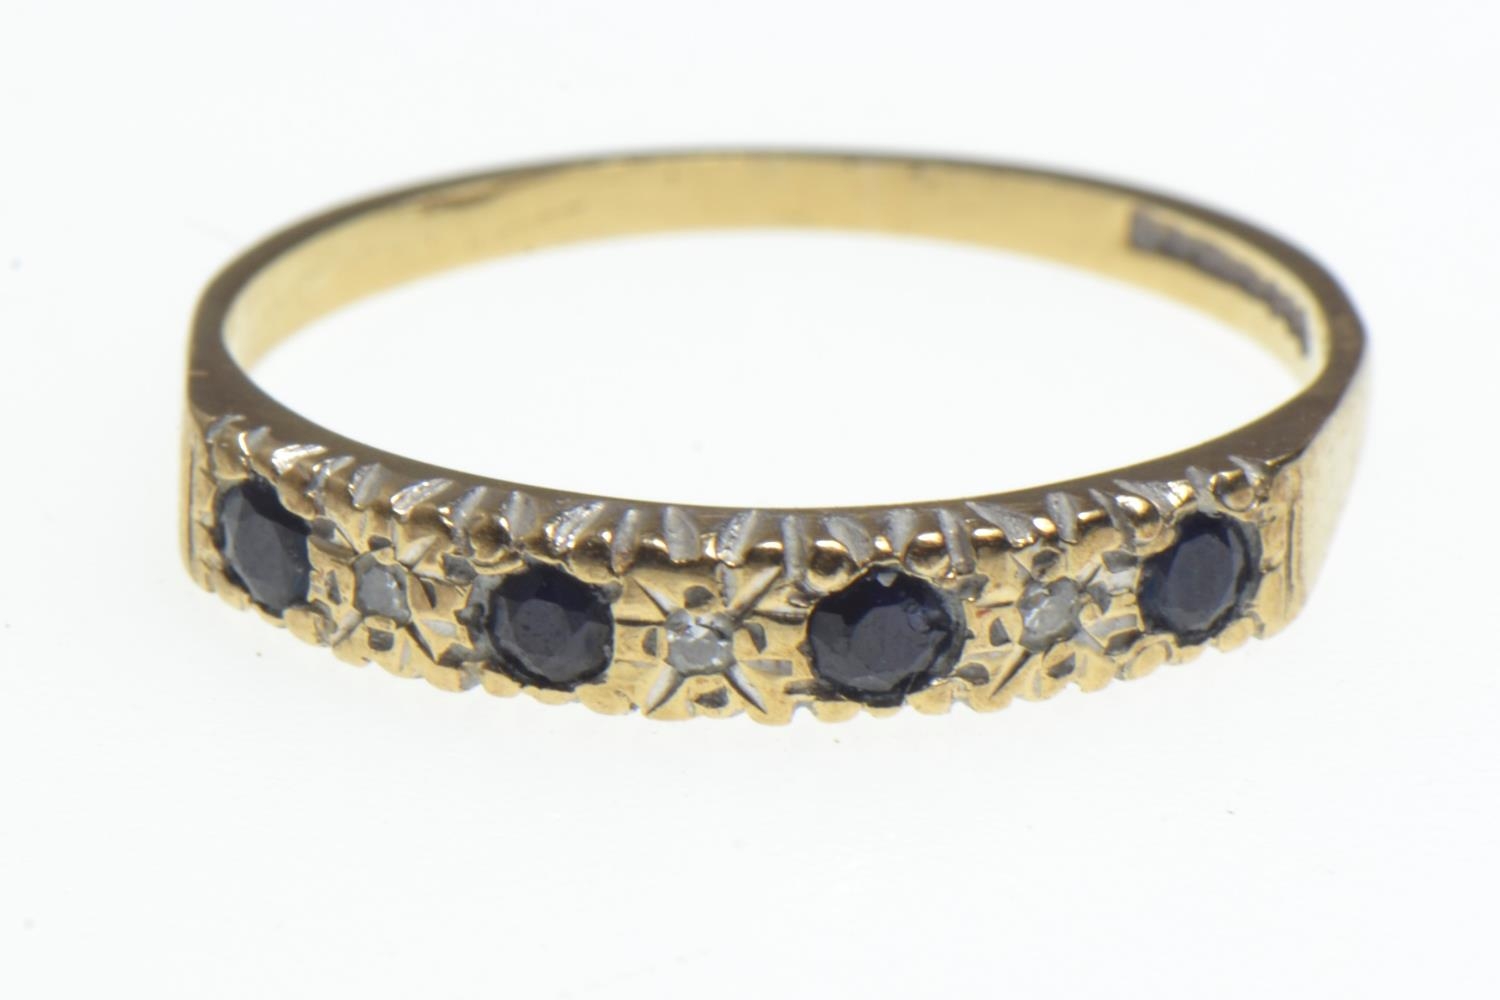 9ct gold half eternity ring set with diamonds & sapphires, size M/N, 1.3 grams 